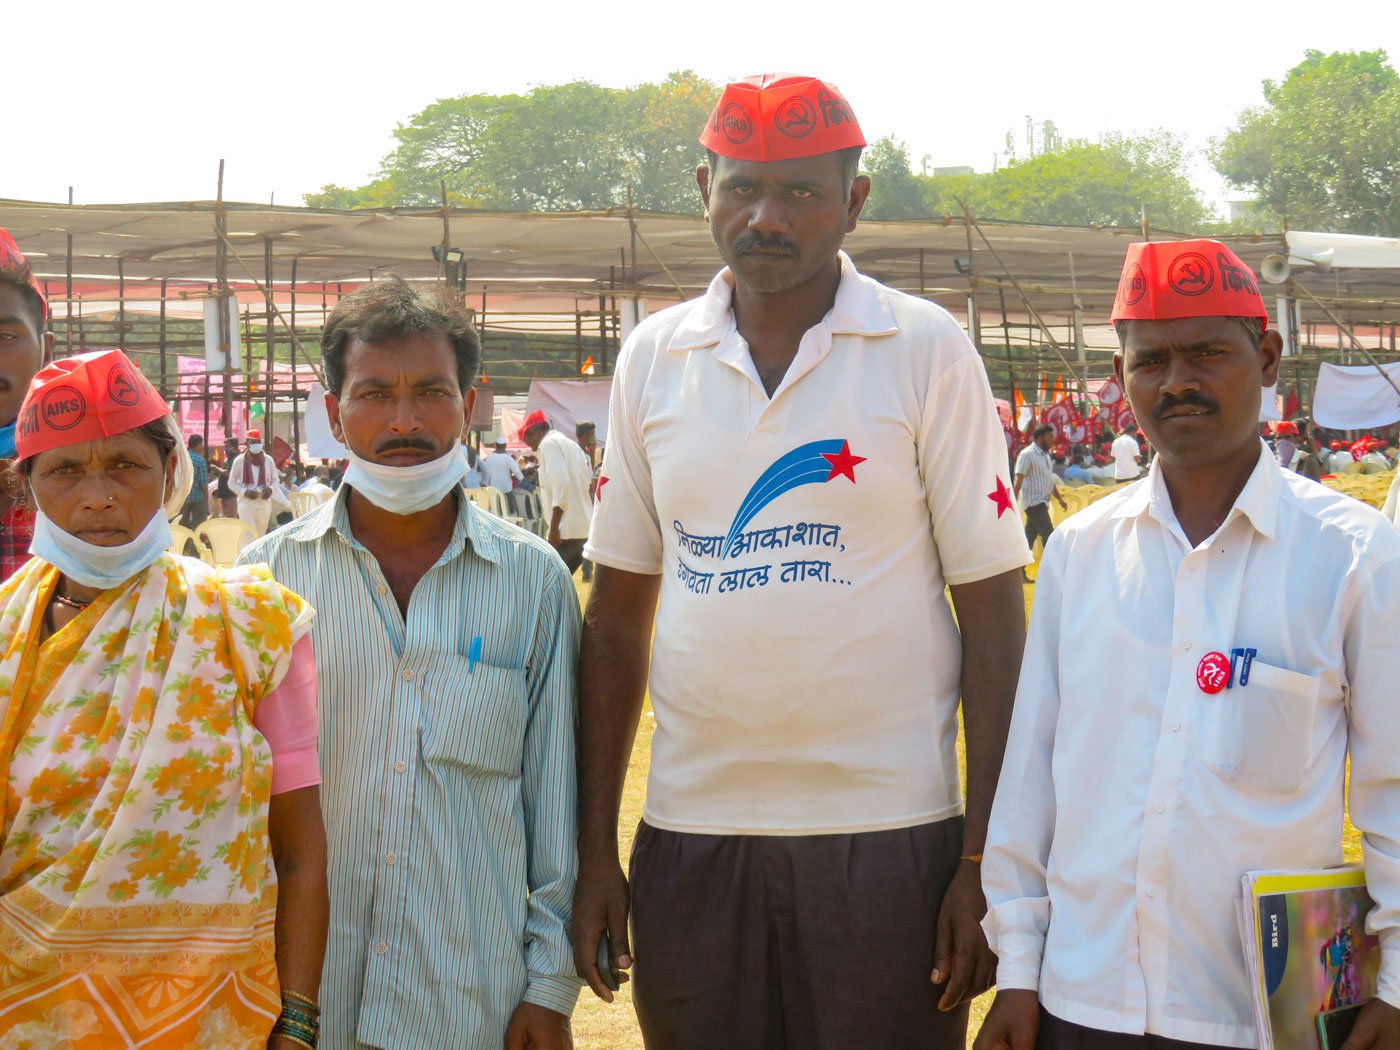 Bhagubai Mengal, Lahu Ughade, Eknath Pengal and Namdev Bhangre (left to right) believe that the laws will affect their households' rations